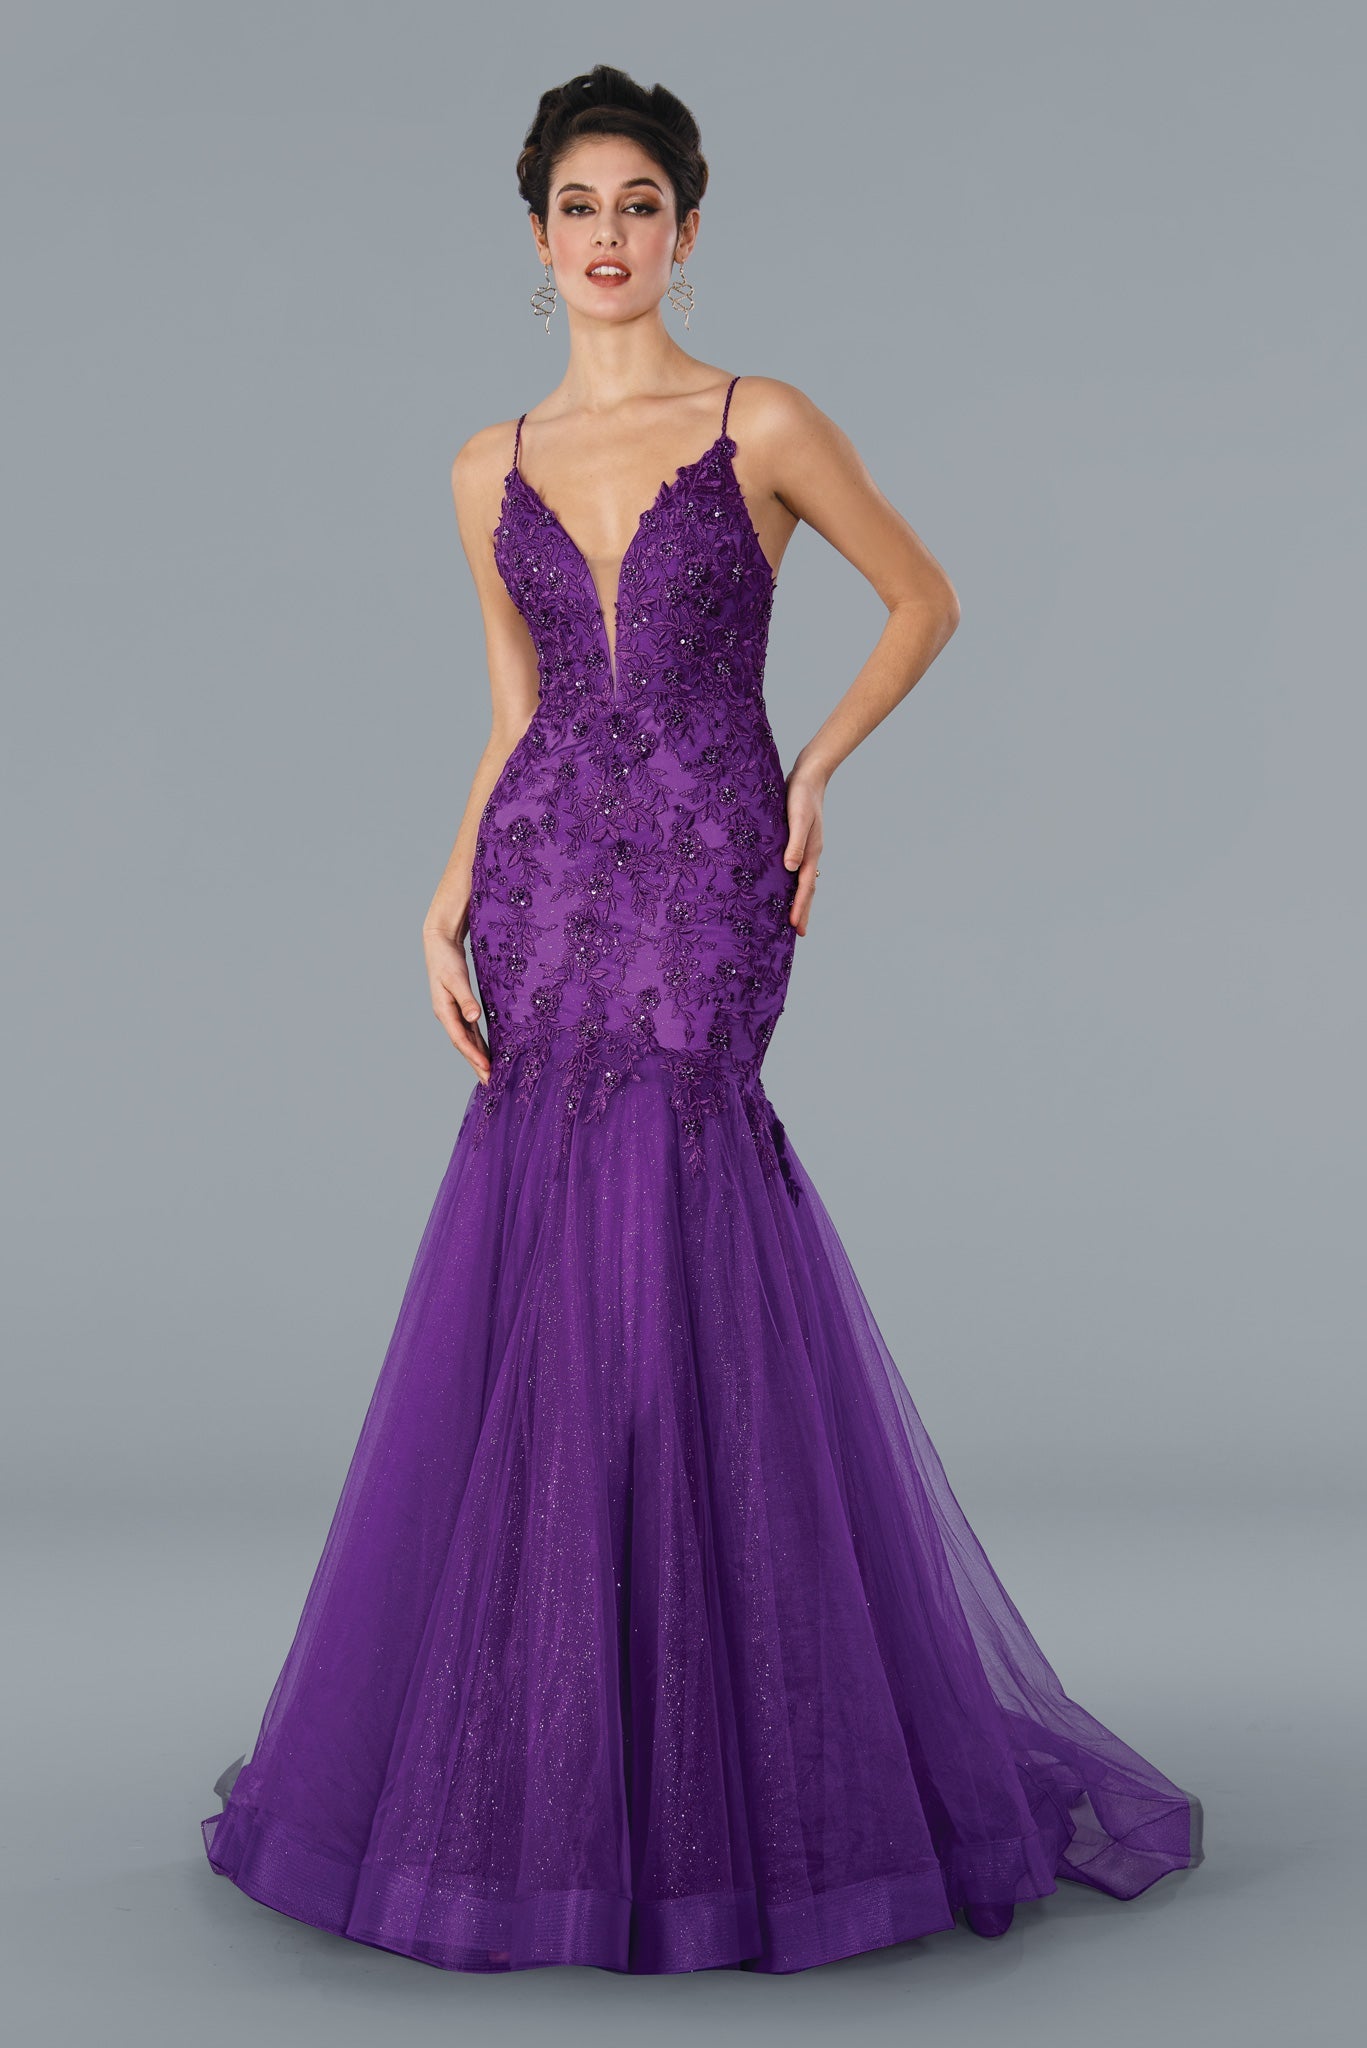 Stella Couture 22043 Size 6 Purple Long Shimmer Mermaid Prom Dress Pageant Gown Bridal Wedding